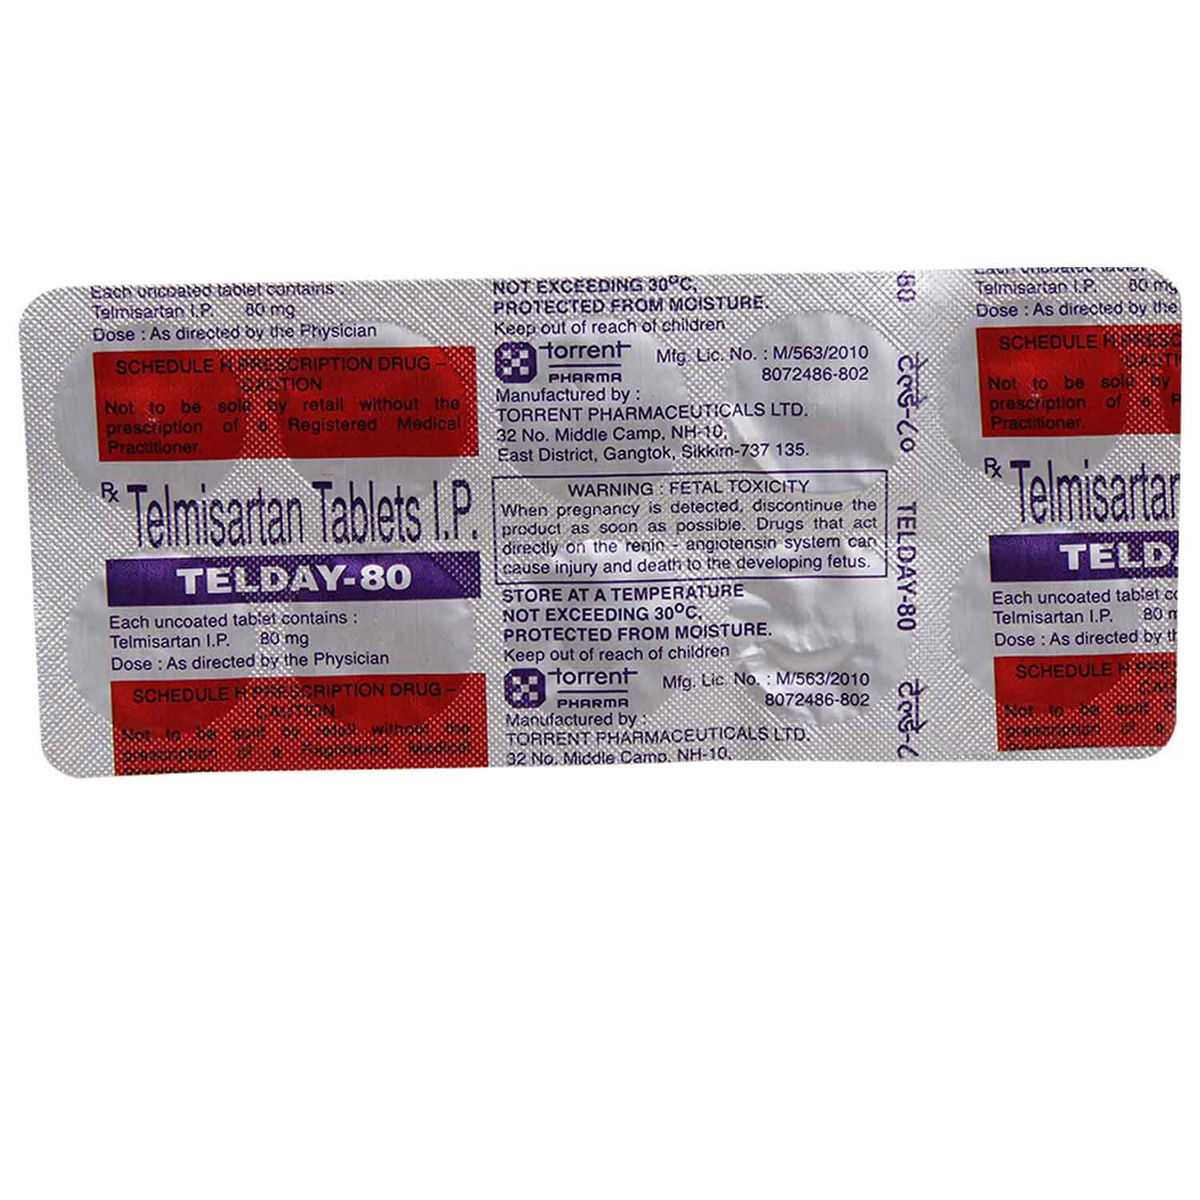 Telday-80 Tablet 10's, Pack of 10 TABLETS